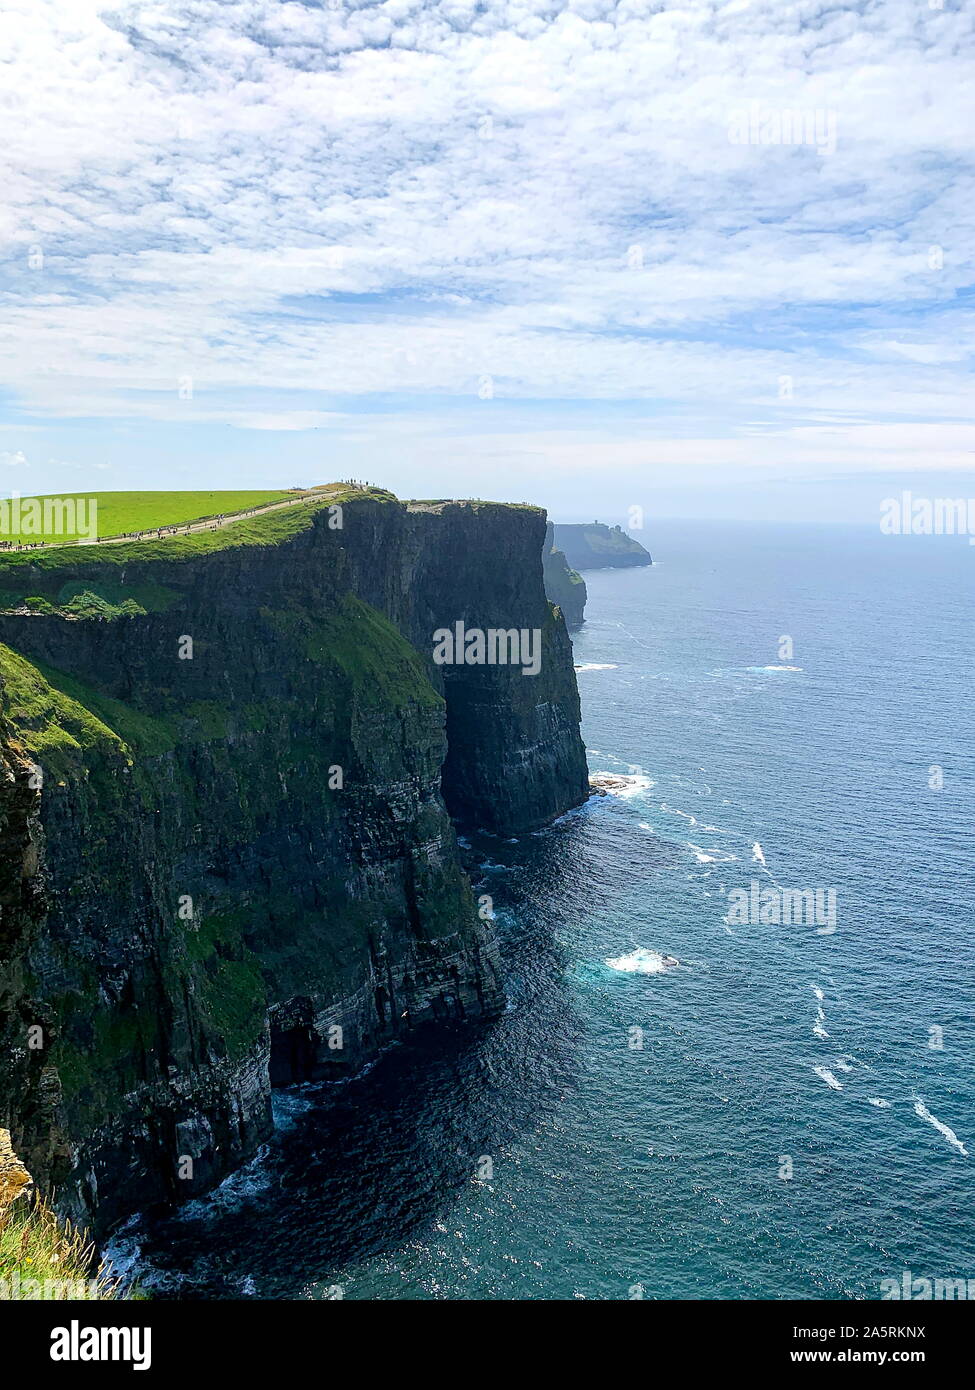 View atop the famous Cliffs of Moher overlooking the atlantic ocean Stock Photo